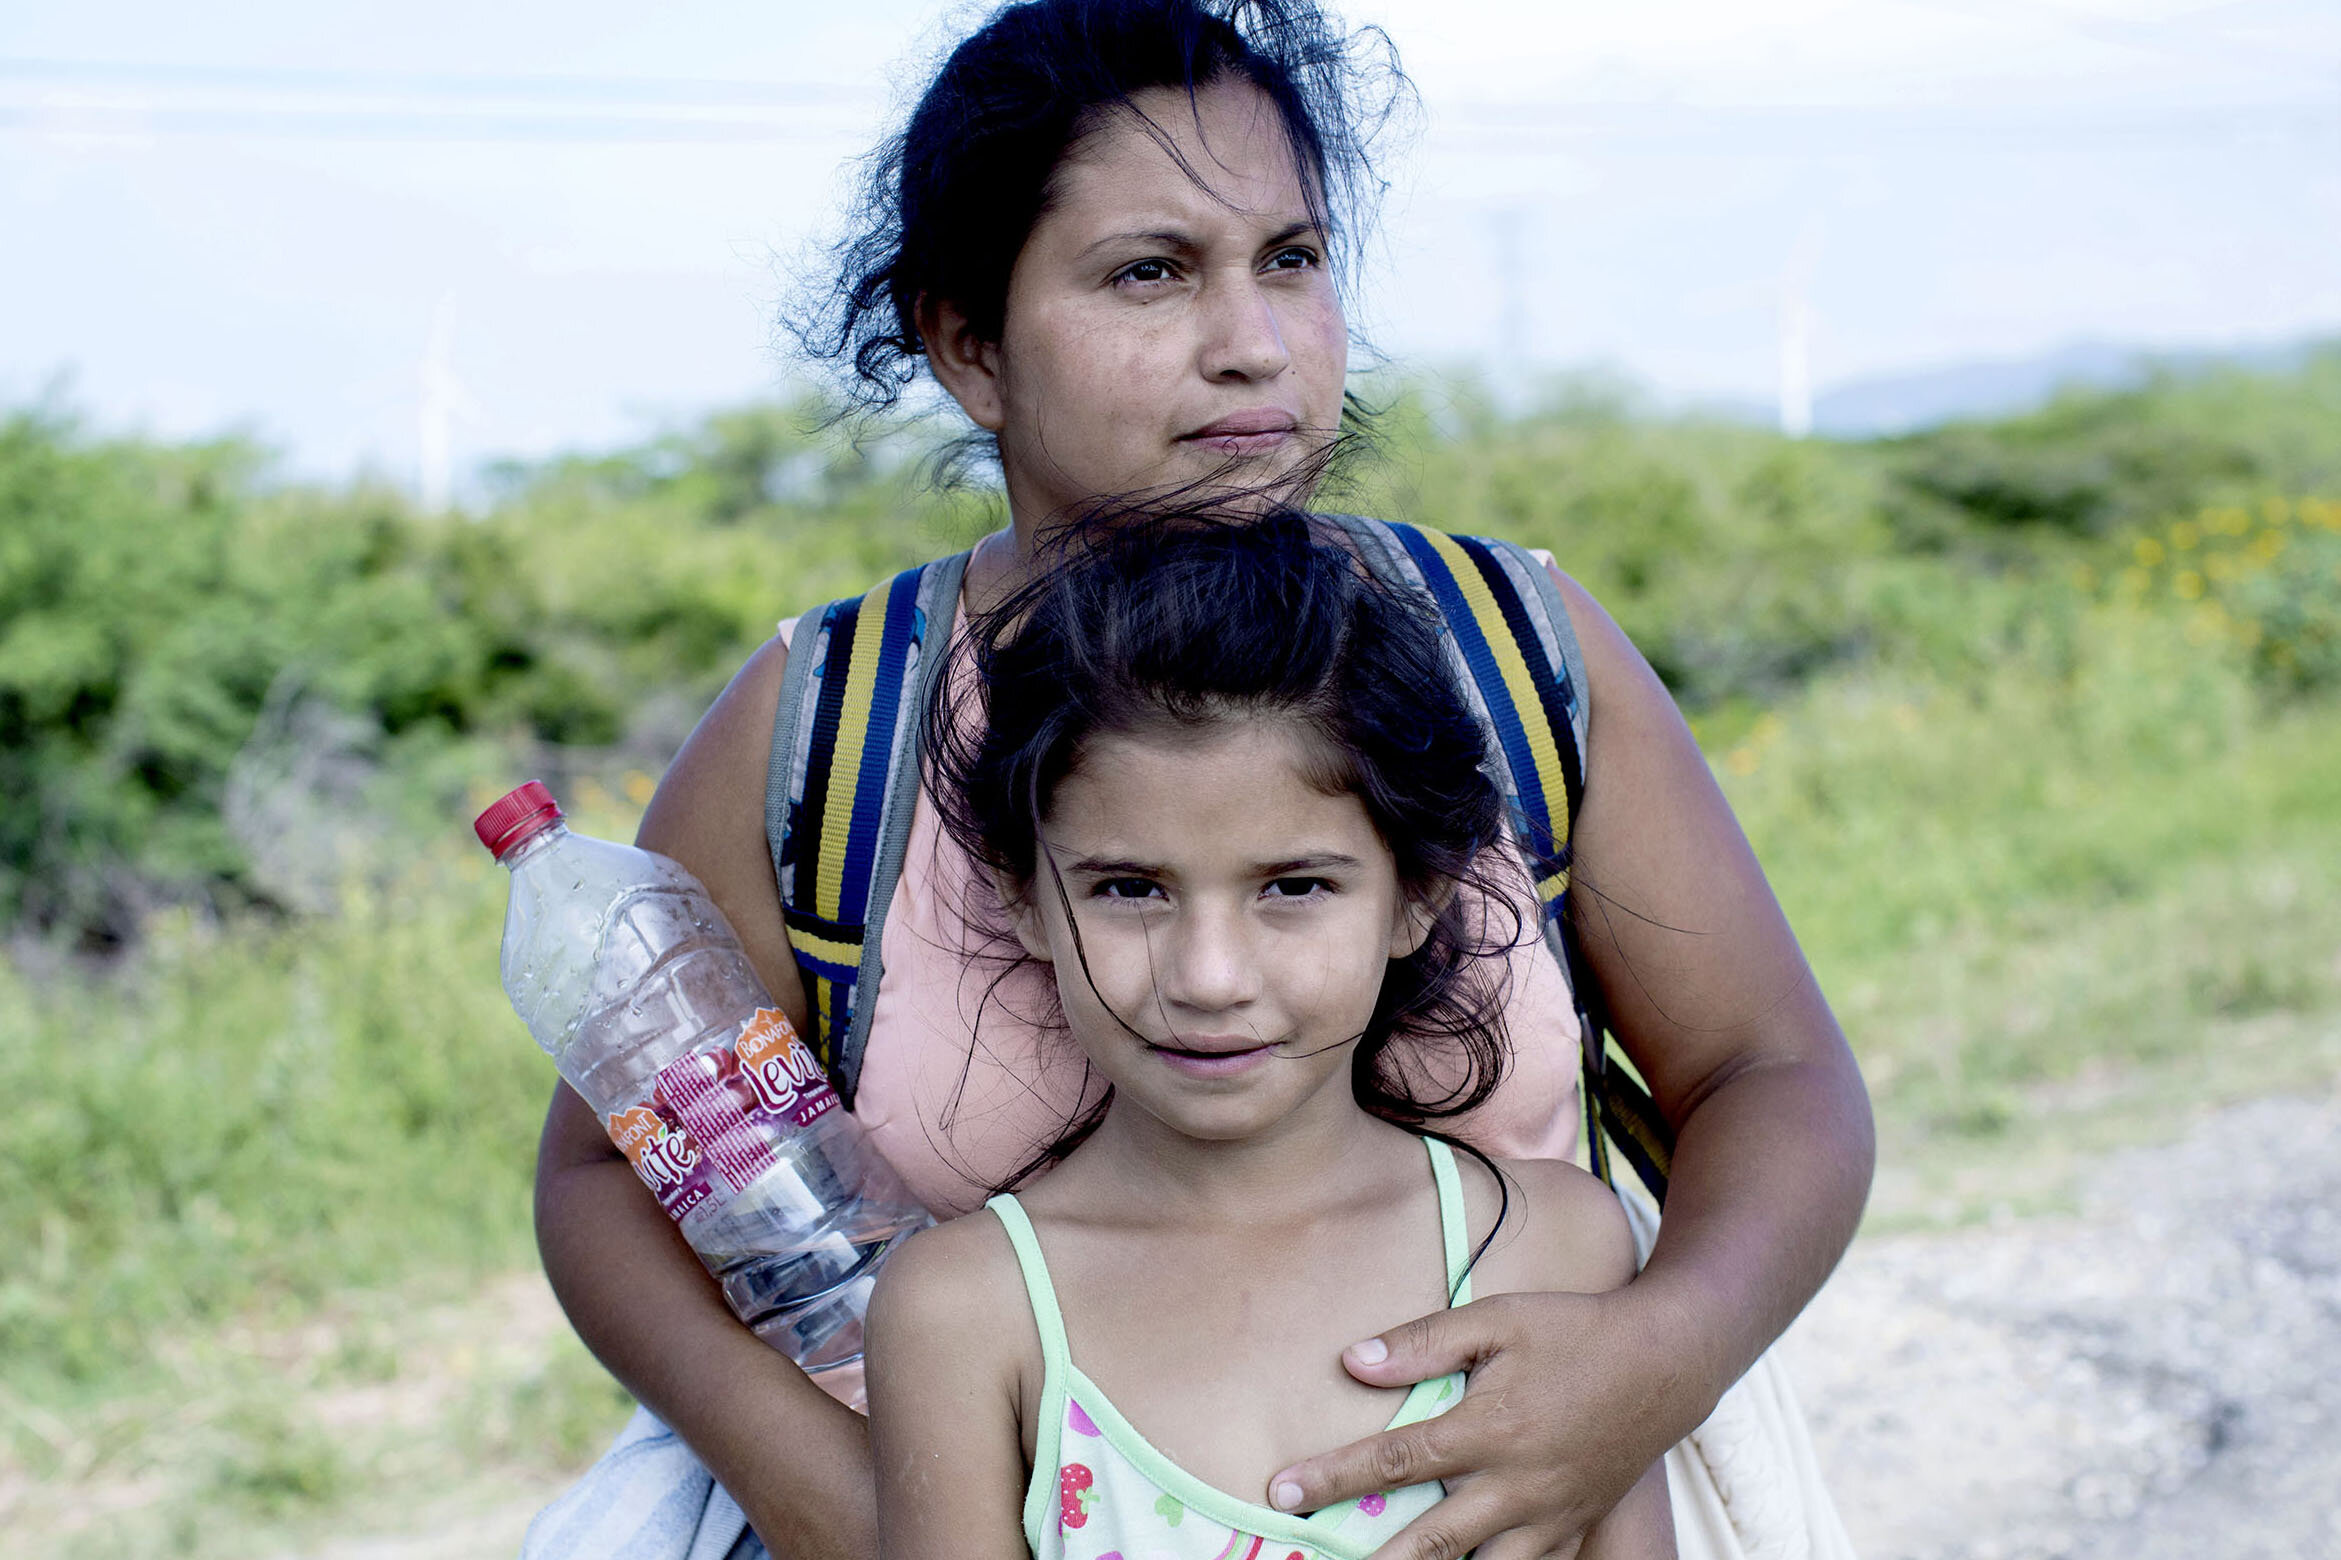 Mexico: Mother and daughter in the so called "caravan", heading towards the U.S. border.